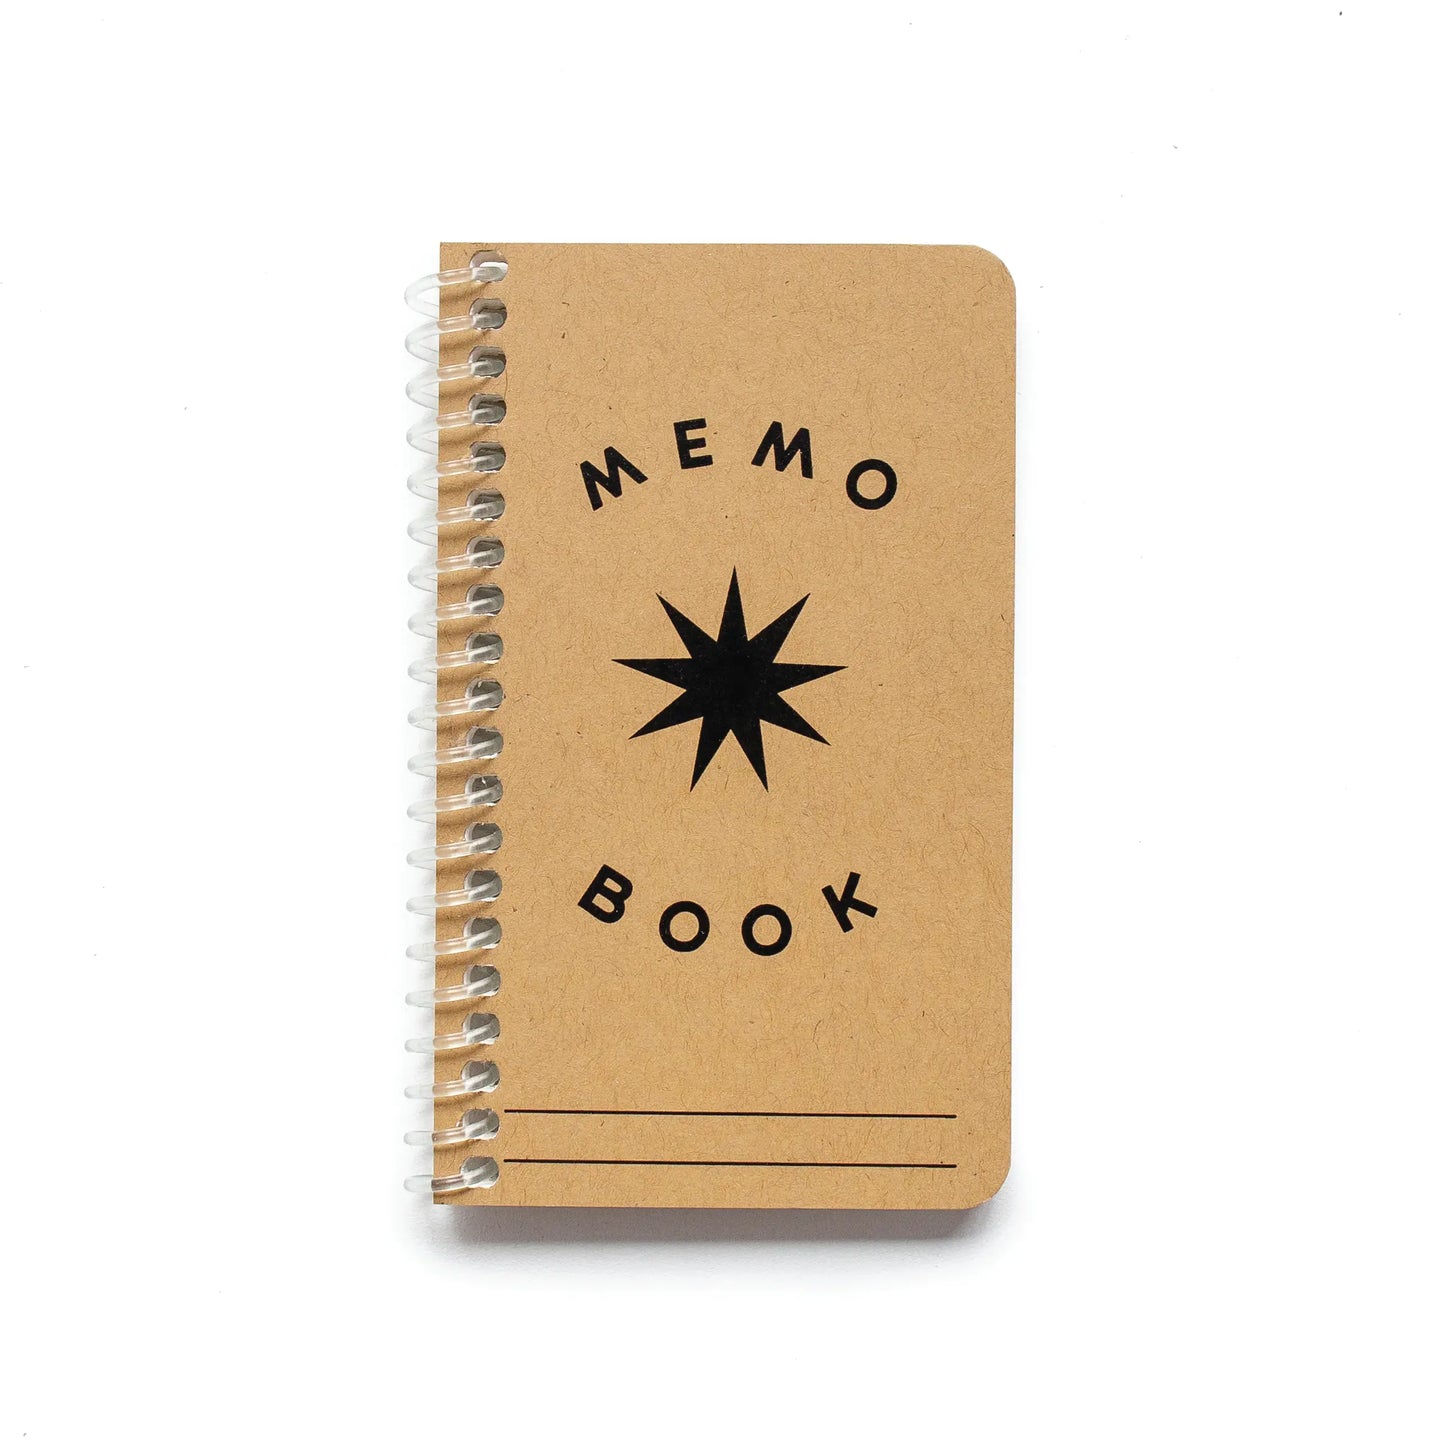 Memo Books by Worthwhile Paper - Spark by K. A. Artist Shop - K. A. Artist Shop